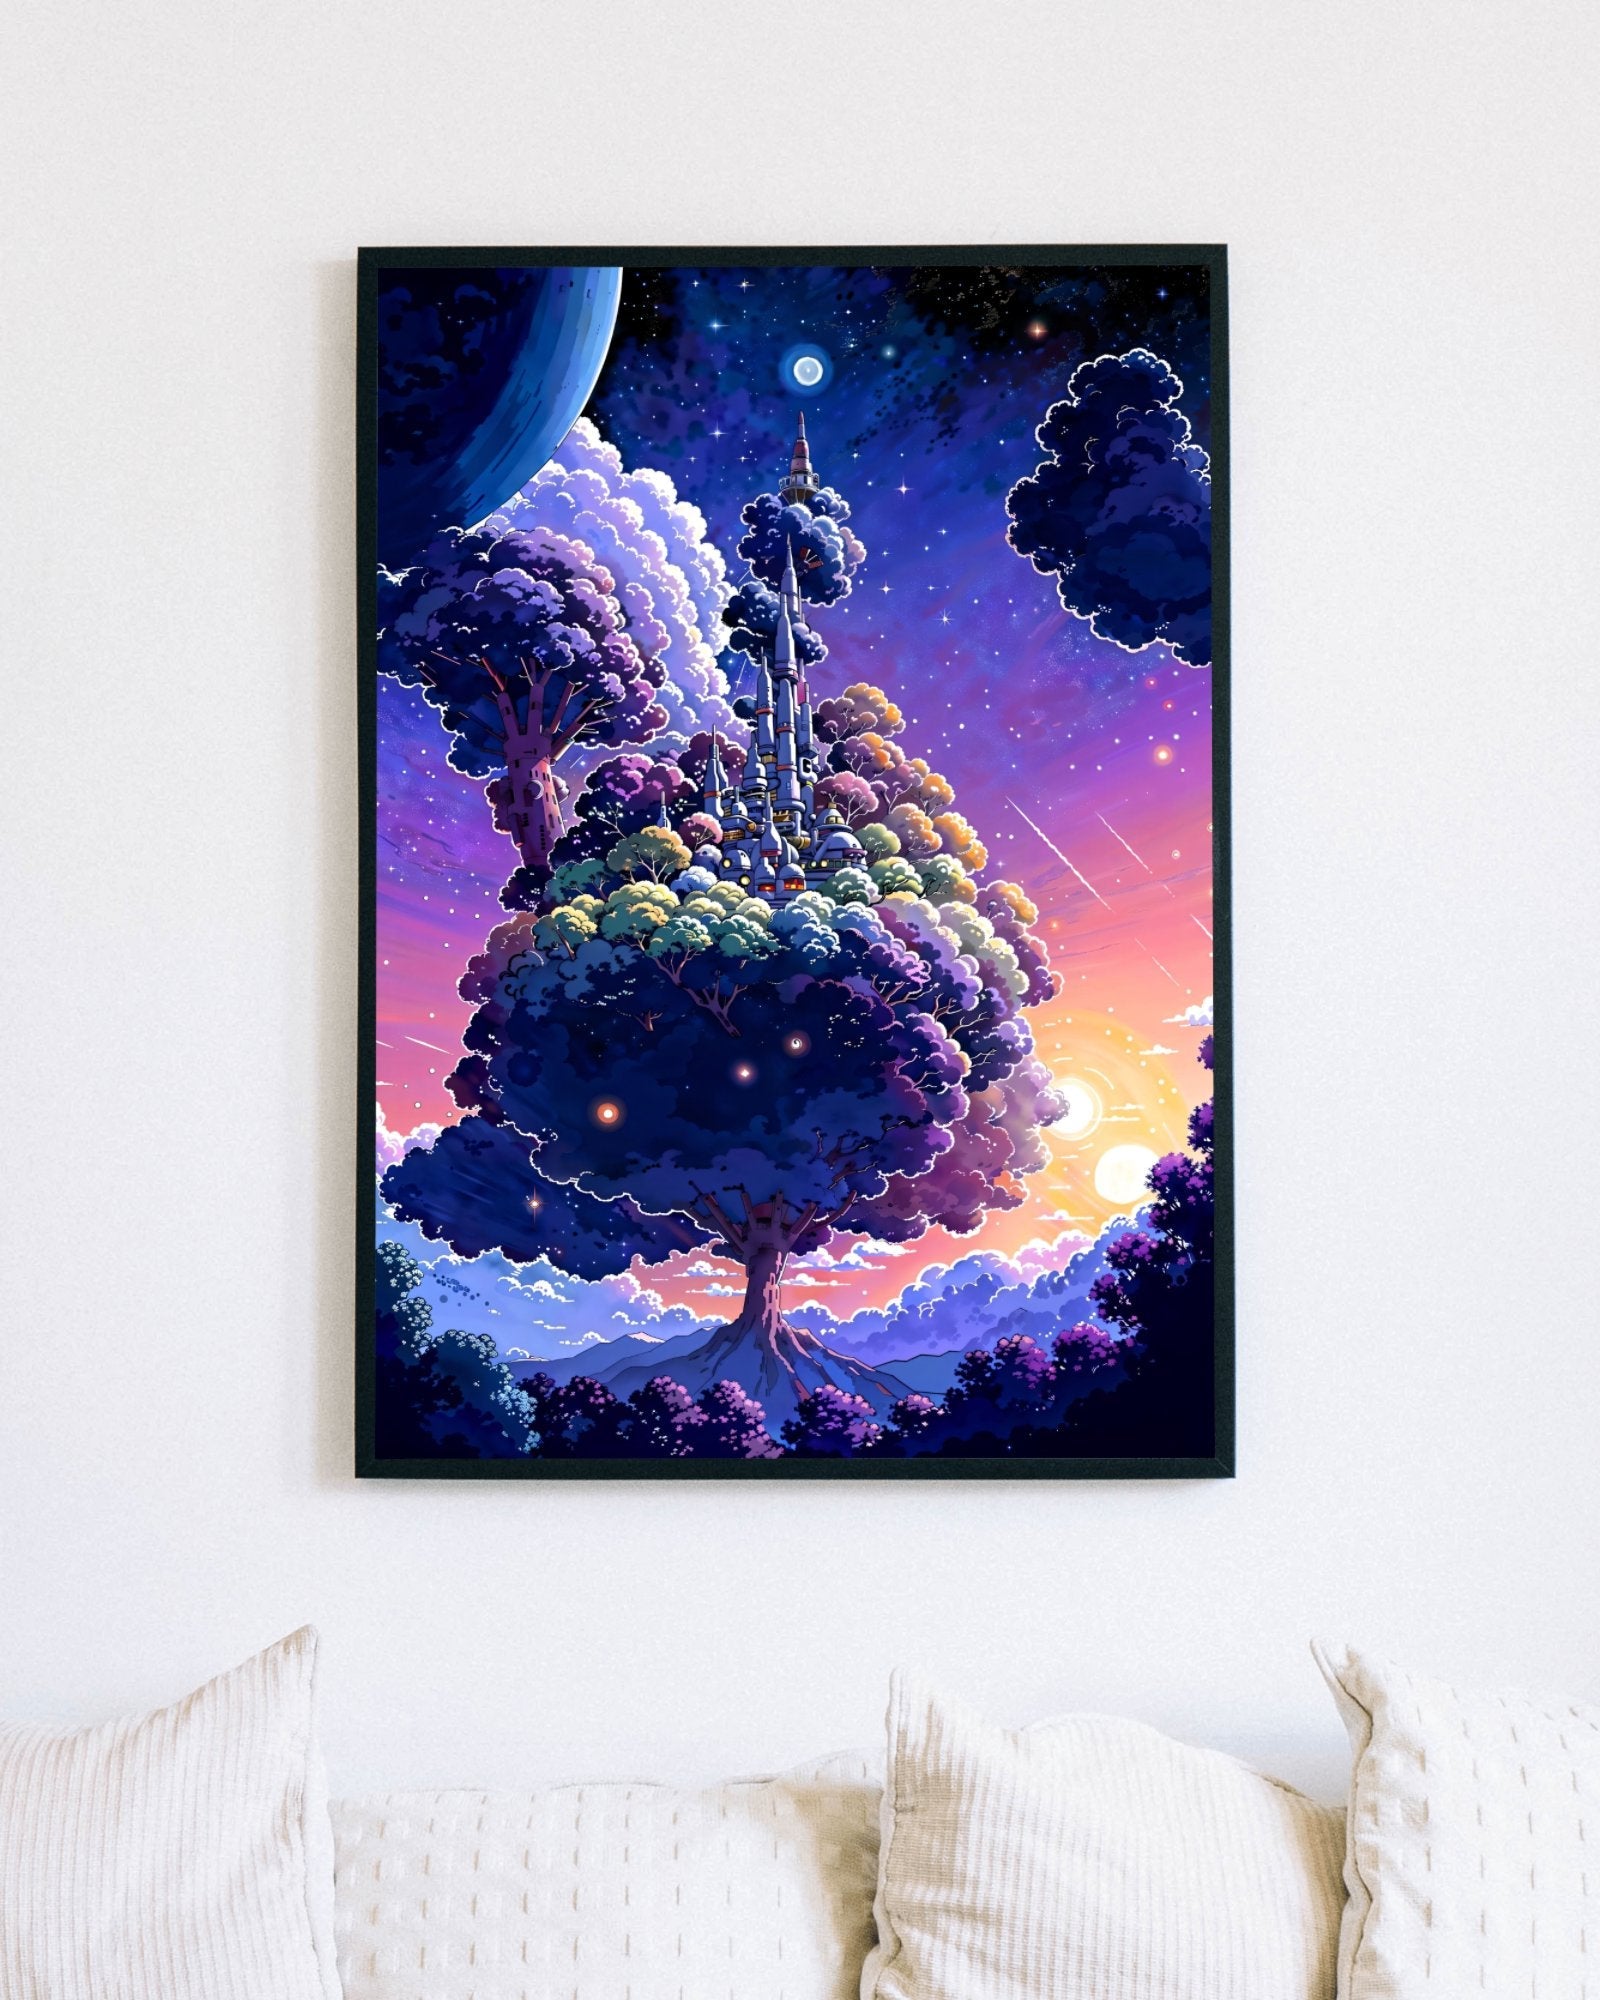 Future city of nature - Poster - Ever colorful